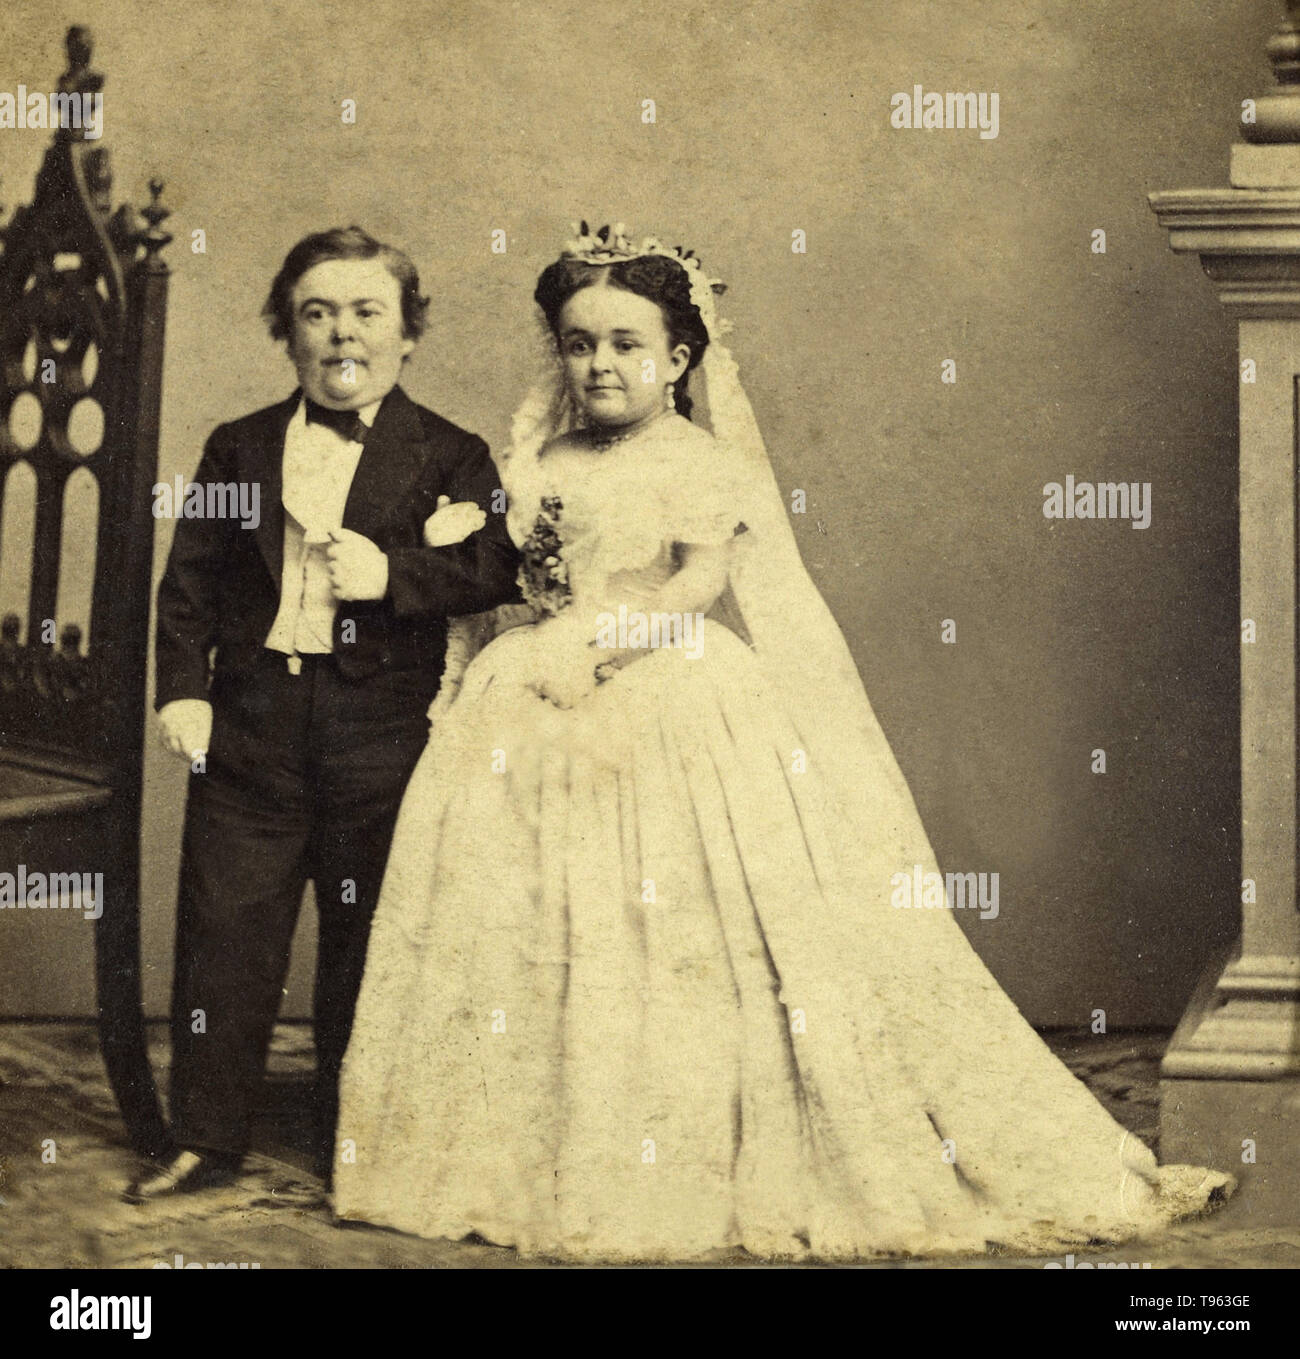 Wedding portrait of 'General Tom Thumb' and Lavinia Warren, 1863. Charles Dauvois (French, active 1860s). Charles Sherwood Stratton (1838-1883), 'General Tom Thumb,' was an American dwarf performer. P.T. Barnum, a distant relative, taught the boy how to sing, dance, mime, and impersonate famous people. Barnum took young Stratton on a tour of Europe, making him an international celebrity. He later became Barnum's business partner. Stock Photo